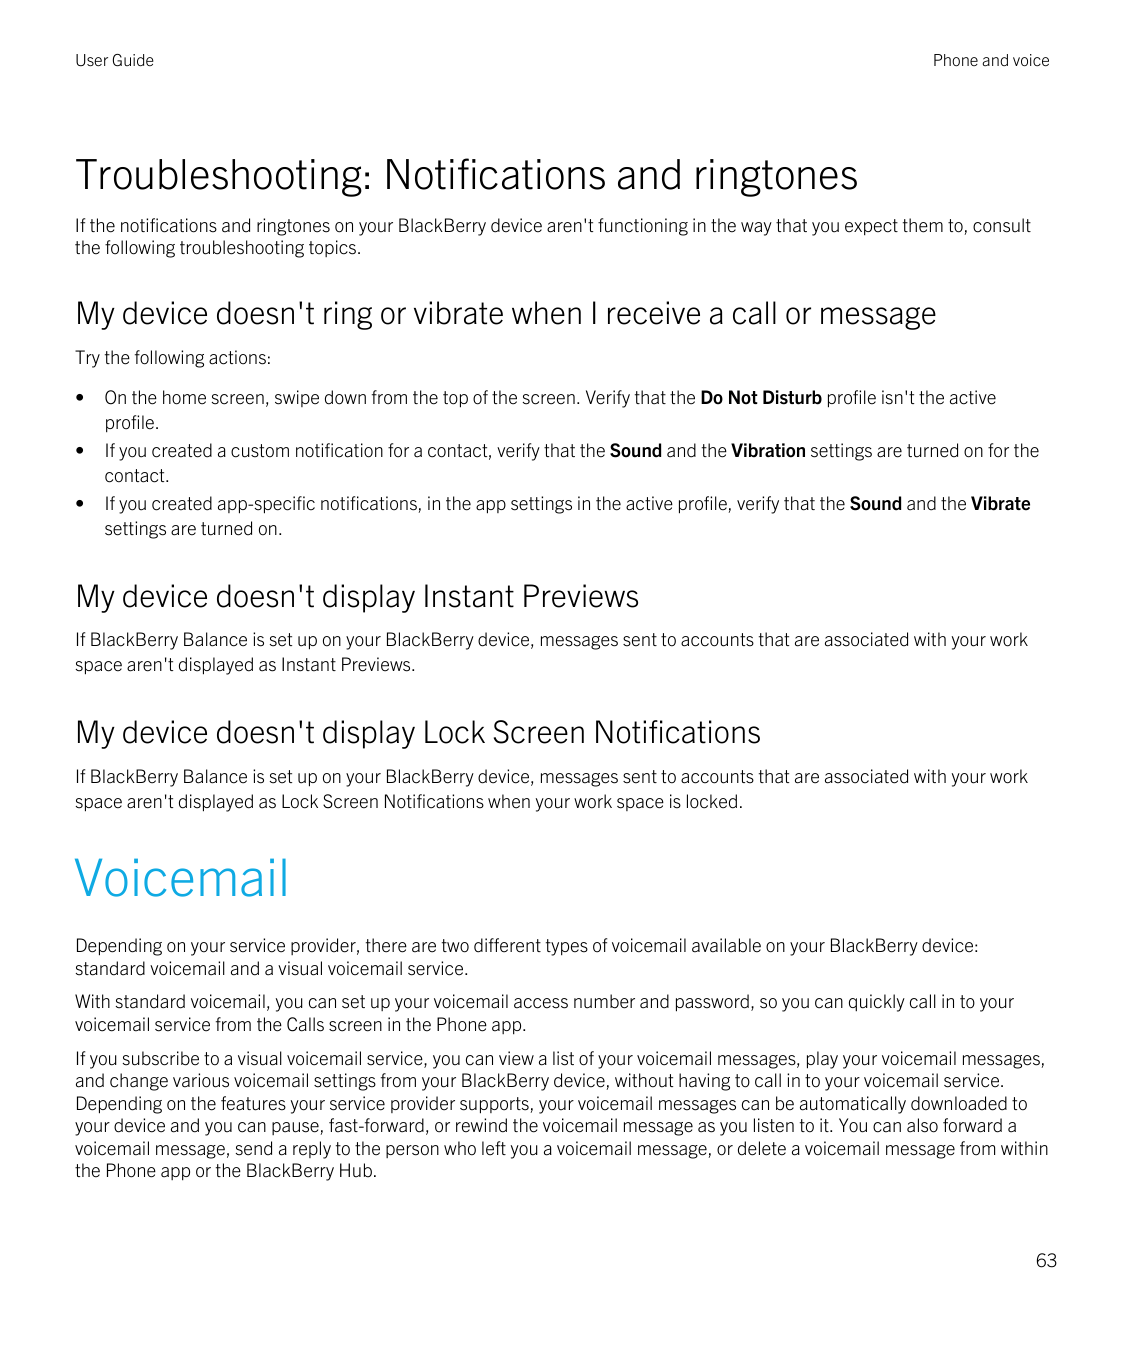 User GuidePhone and voiceTroubleshooting: Notifications and ringtonesIf the notifications and ringtones on your BlackBerry devic